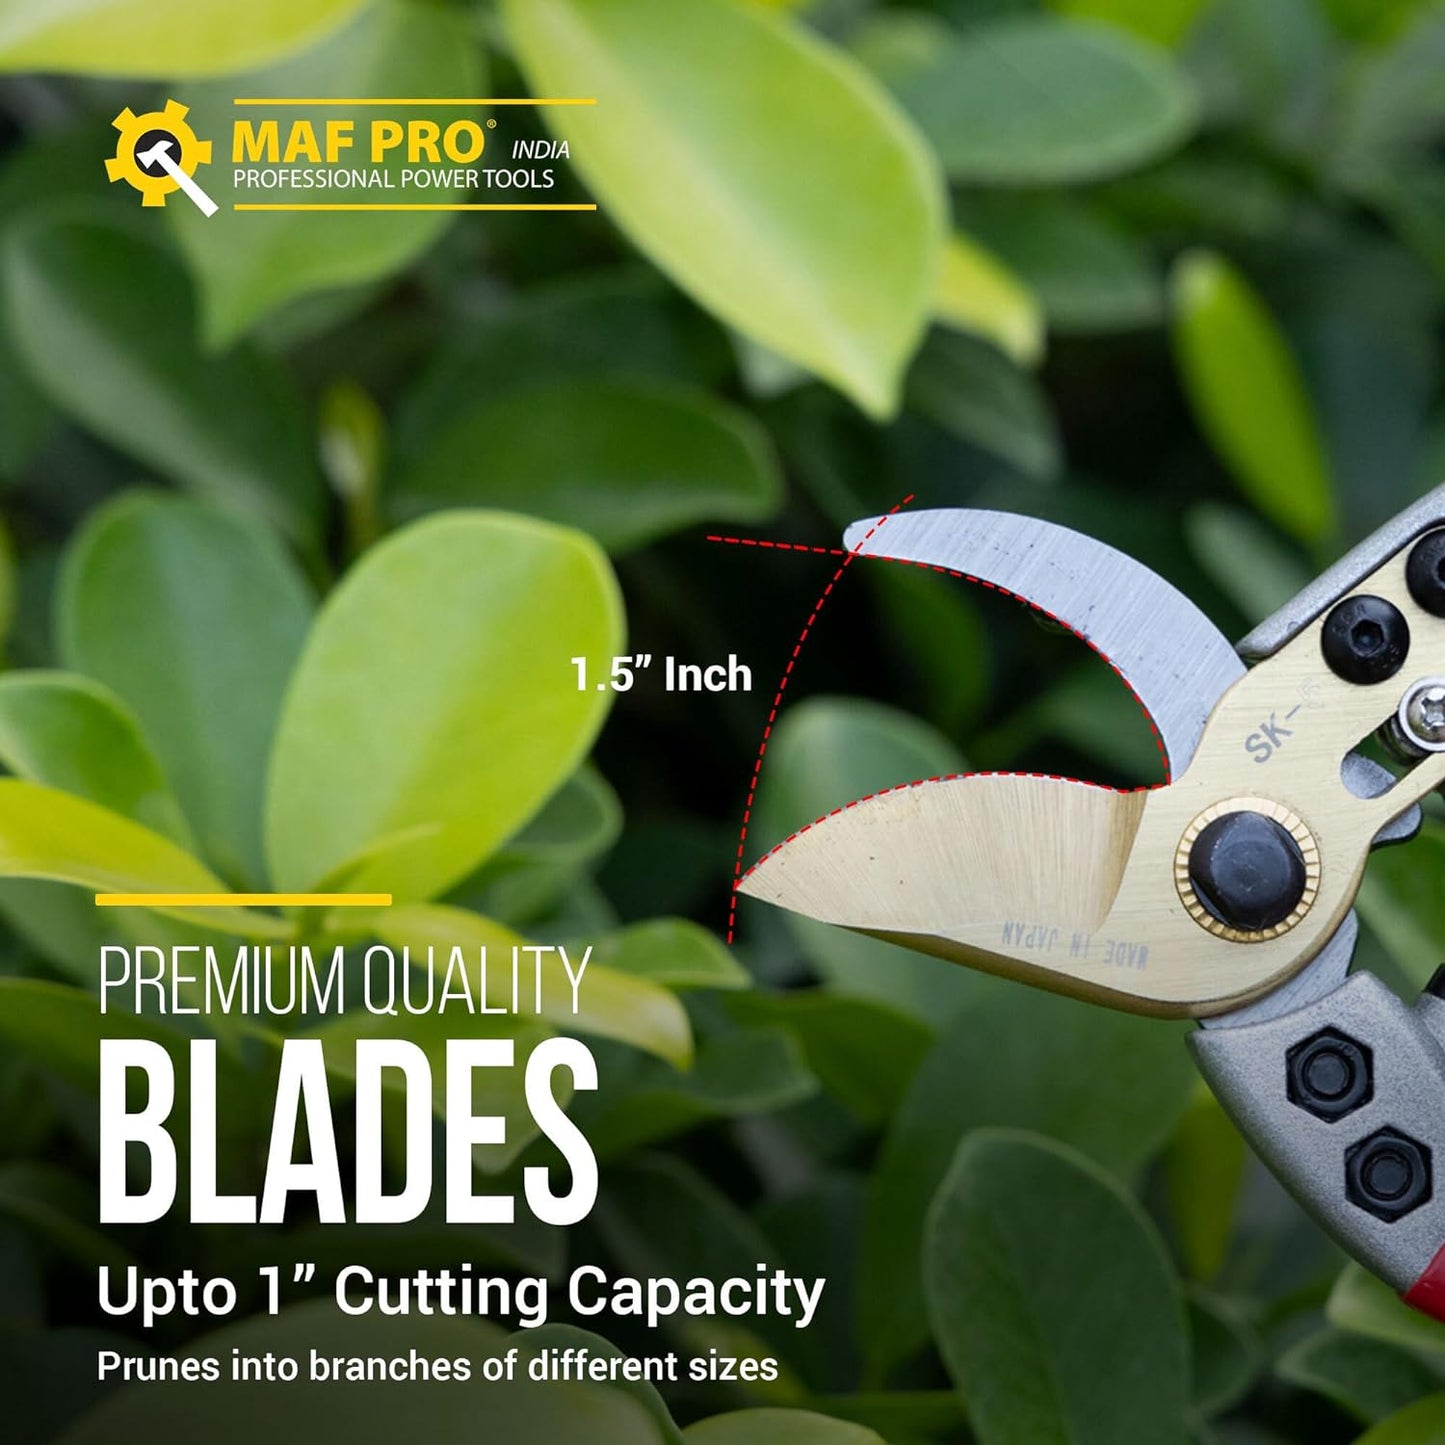 MAF Heavy Duty 8 Inch Garden Bypass Pruning Shears with Carbon Steel Blade Coated in Teflon – Ideal Tree Trimmers, Secateurs, and Plant Cutters for Home Gardening